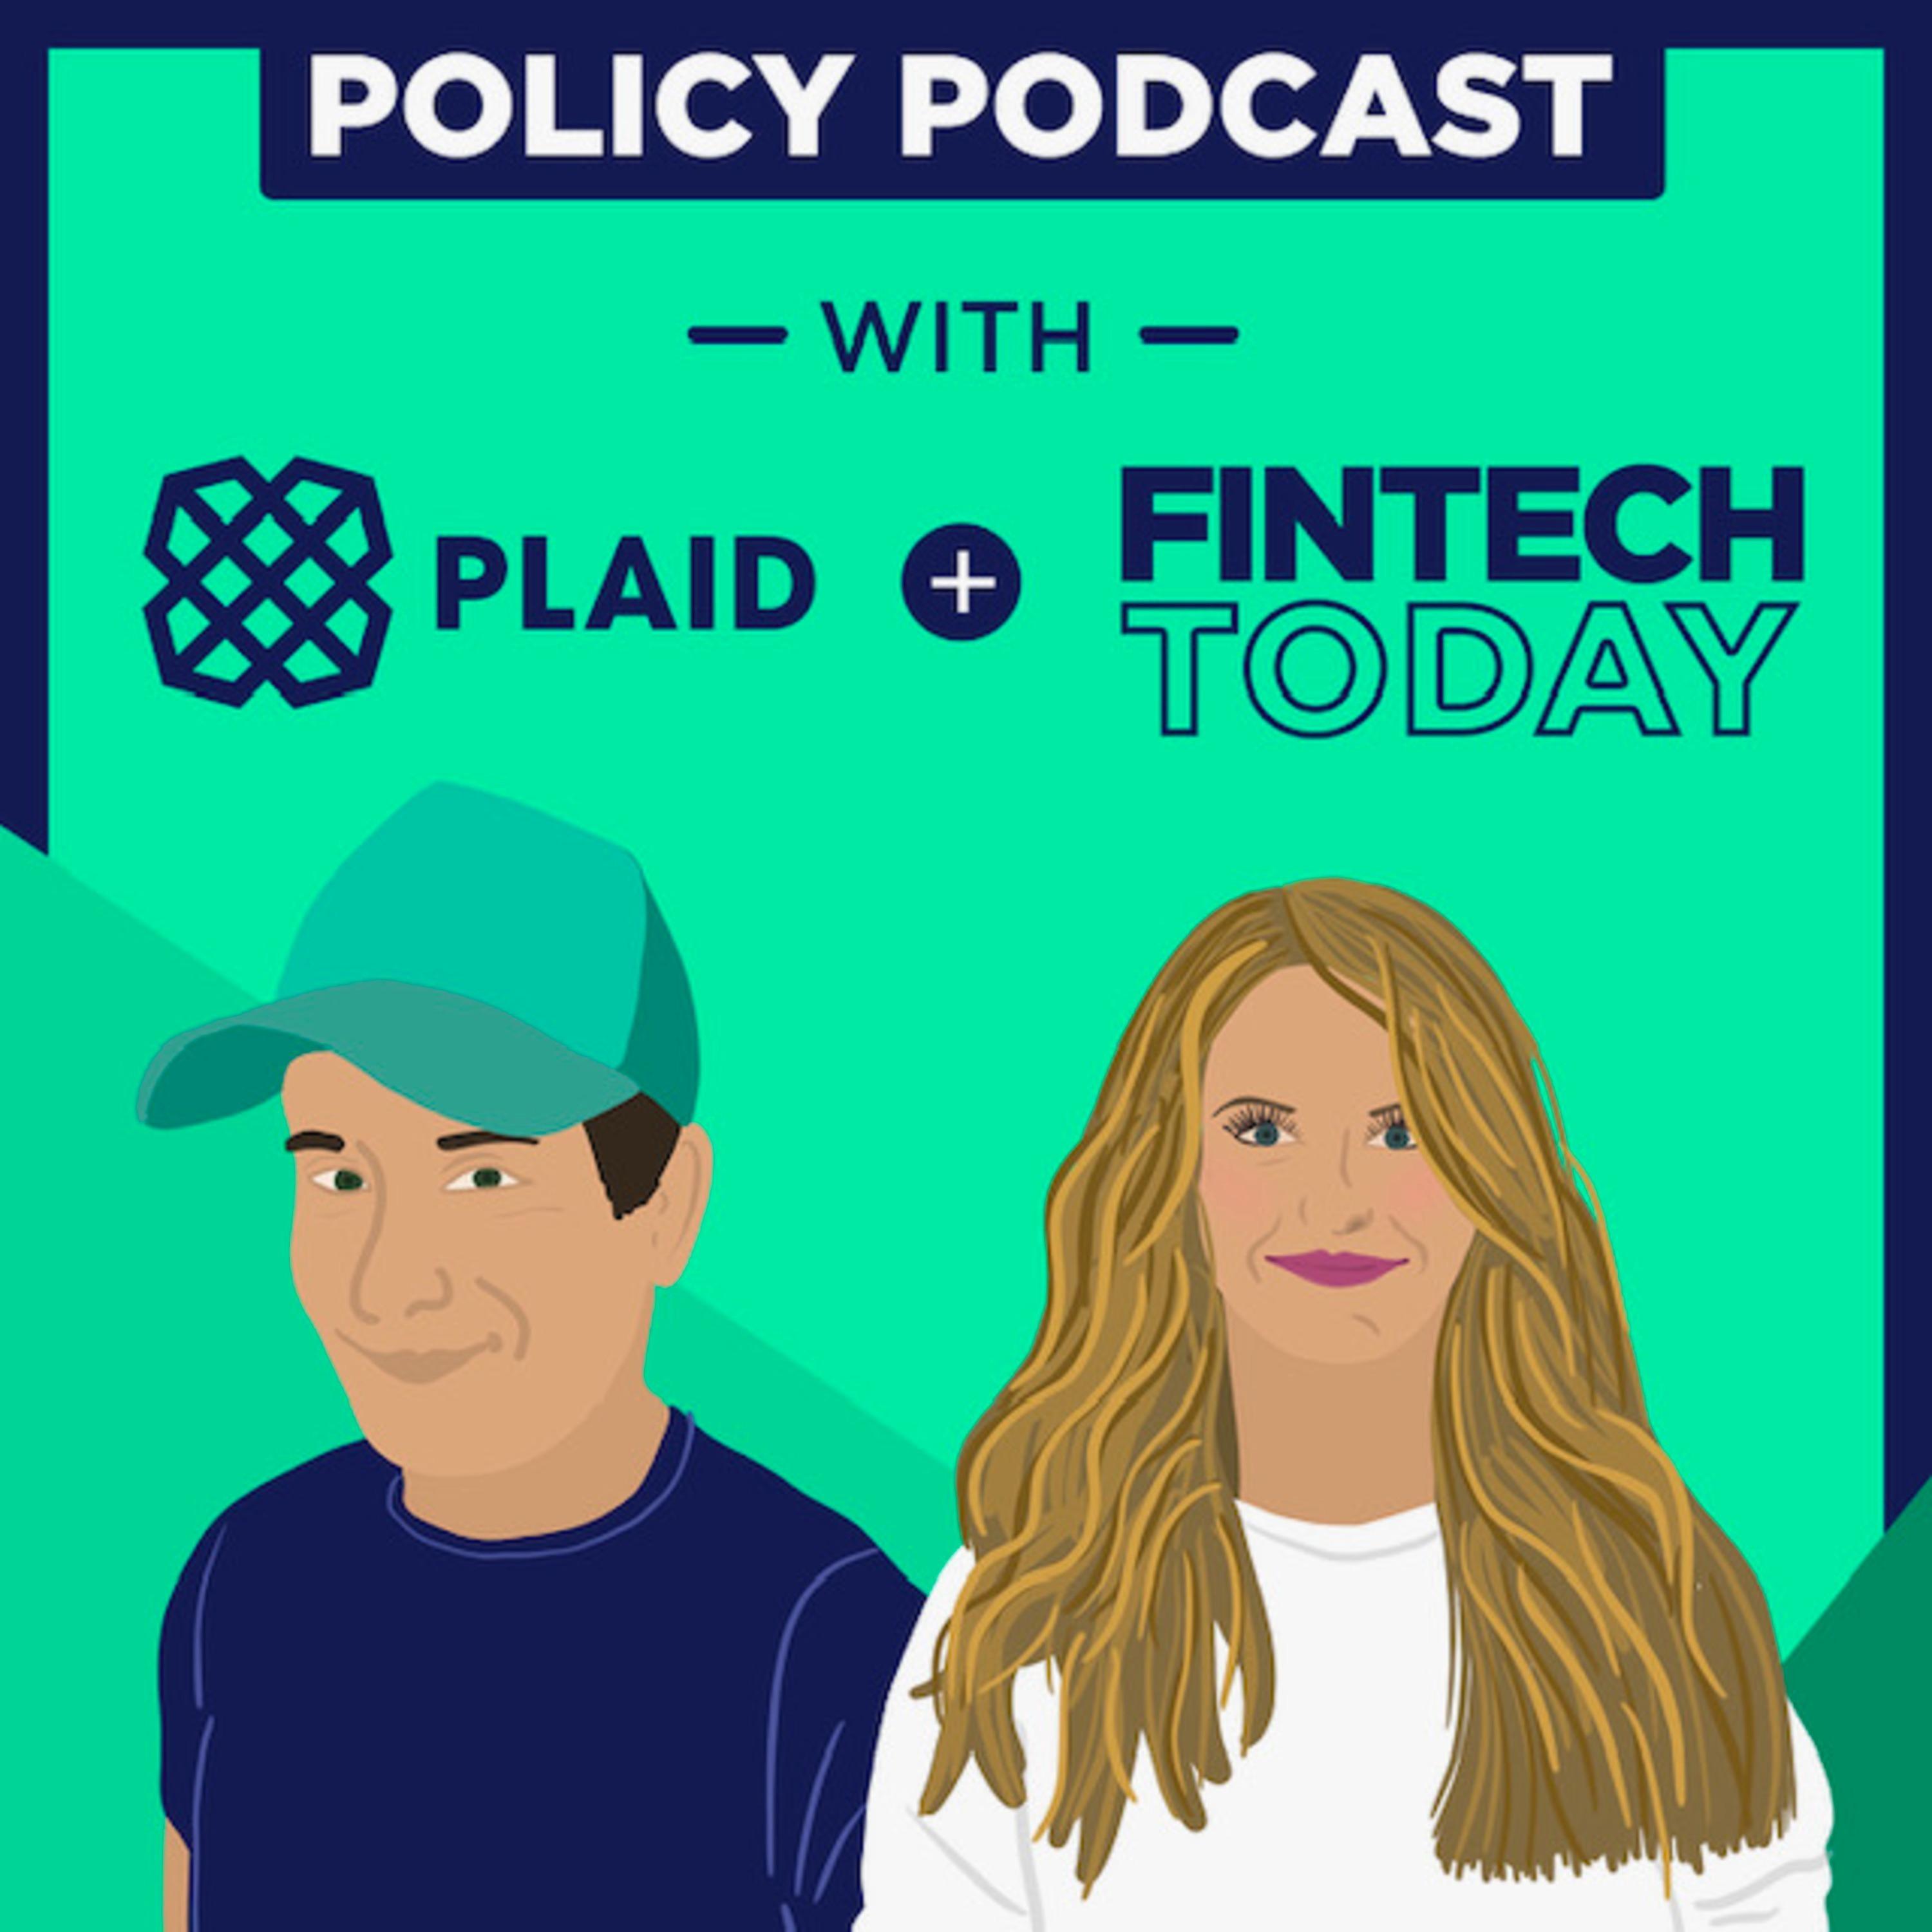 Policy Podcast with Plaid and Fintech Today